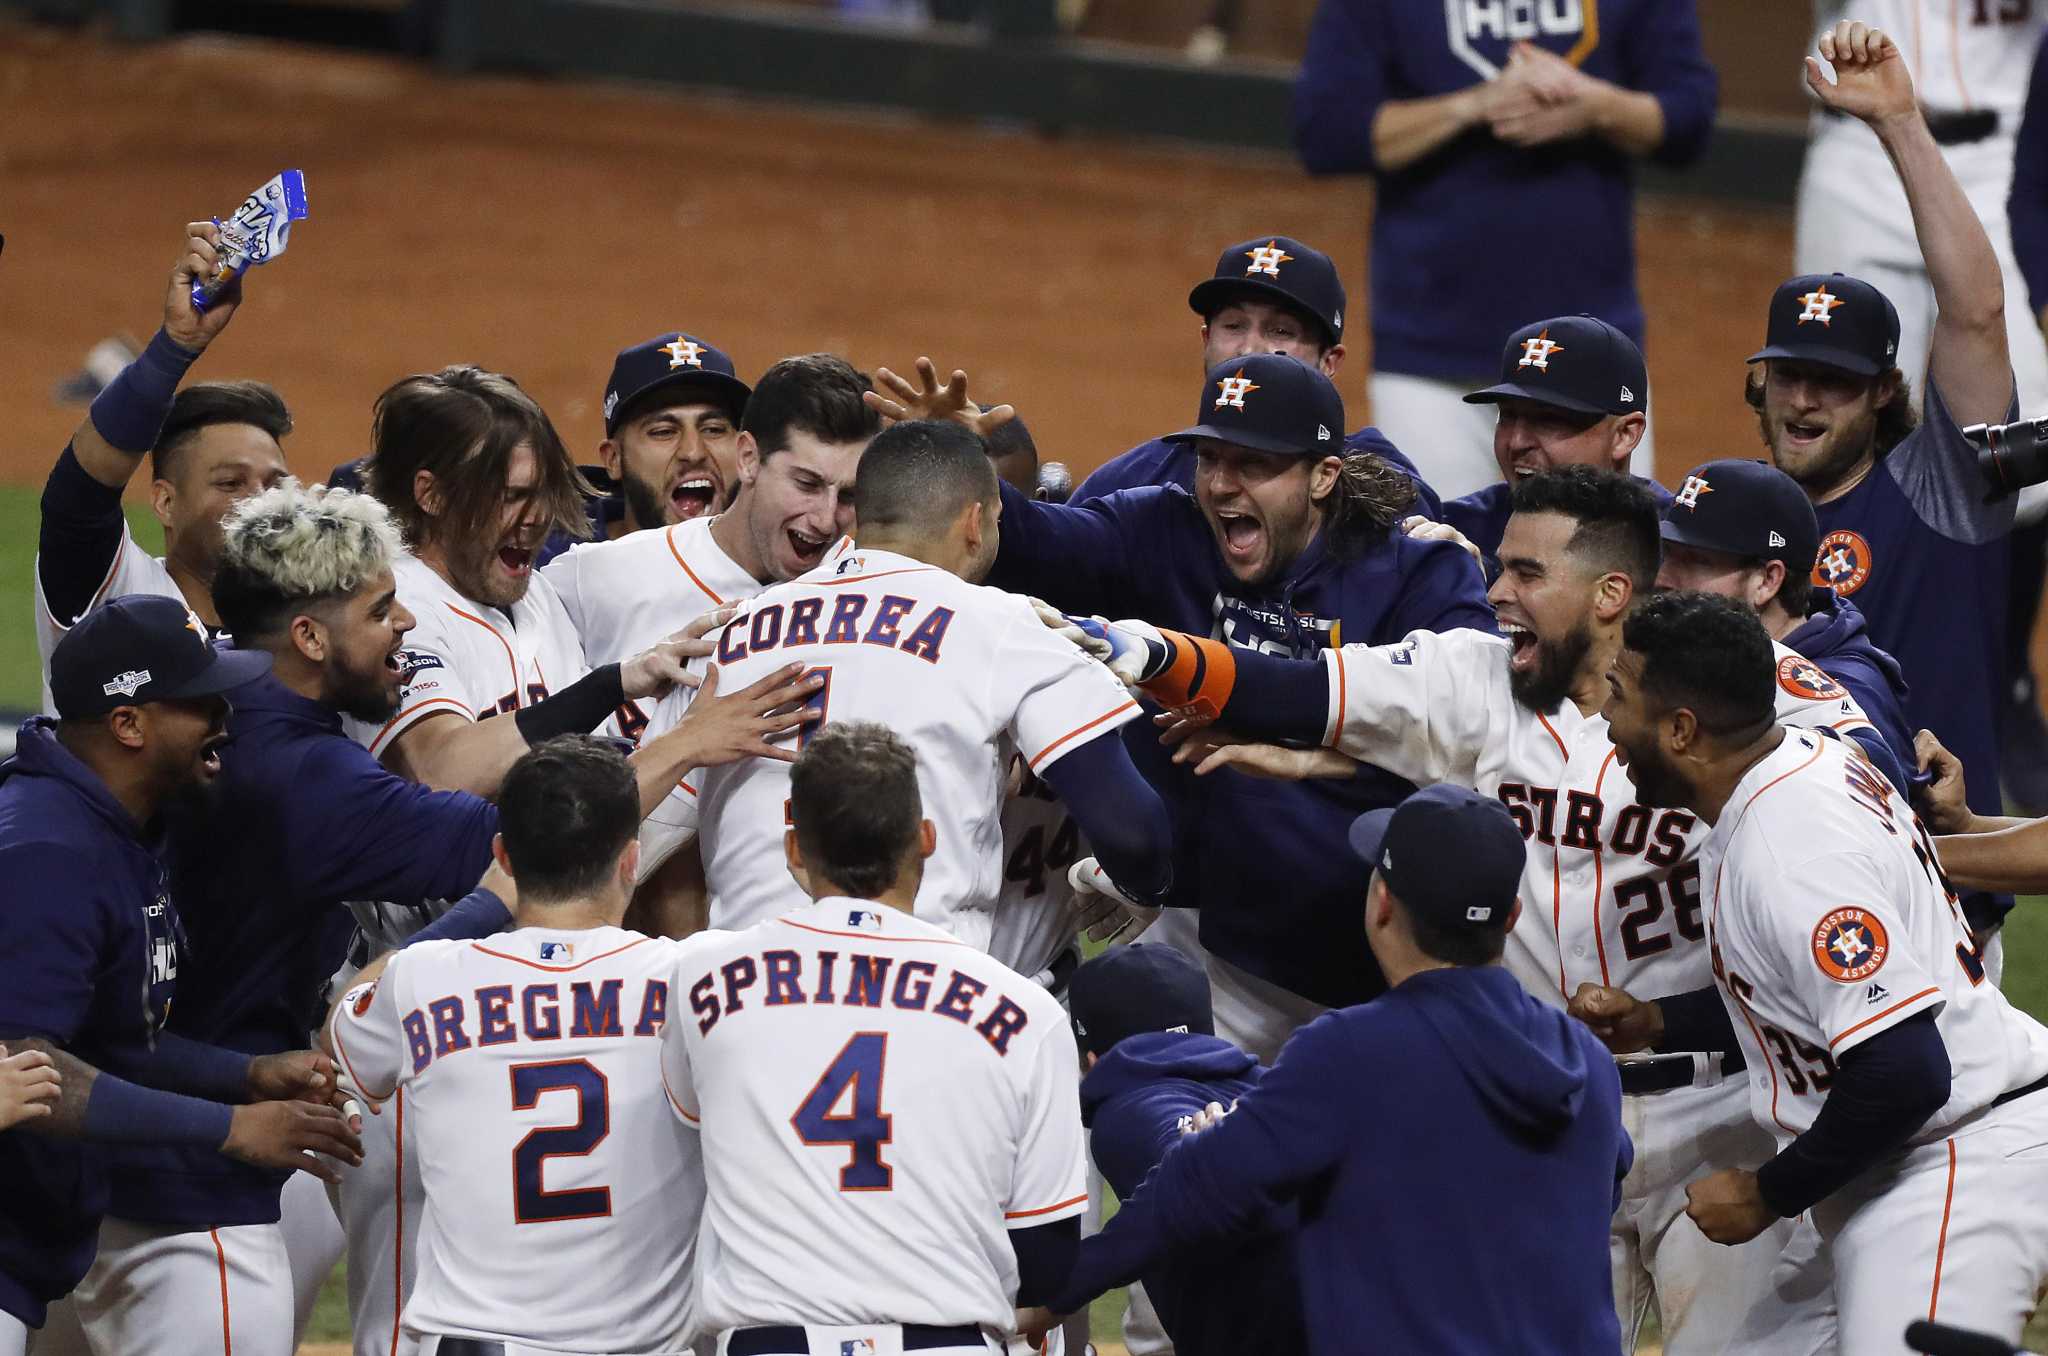 Worth shouting about: George Springer wins World Series MVP